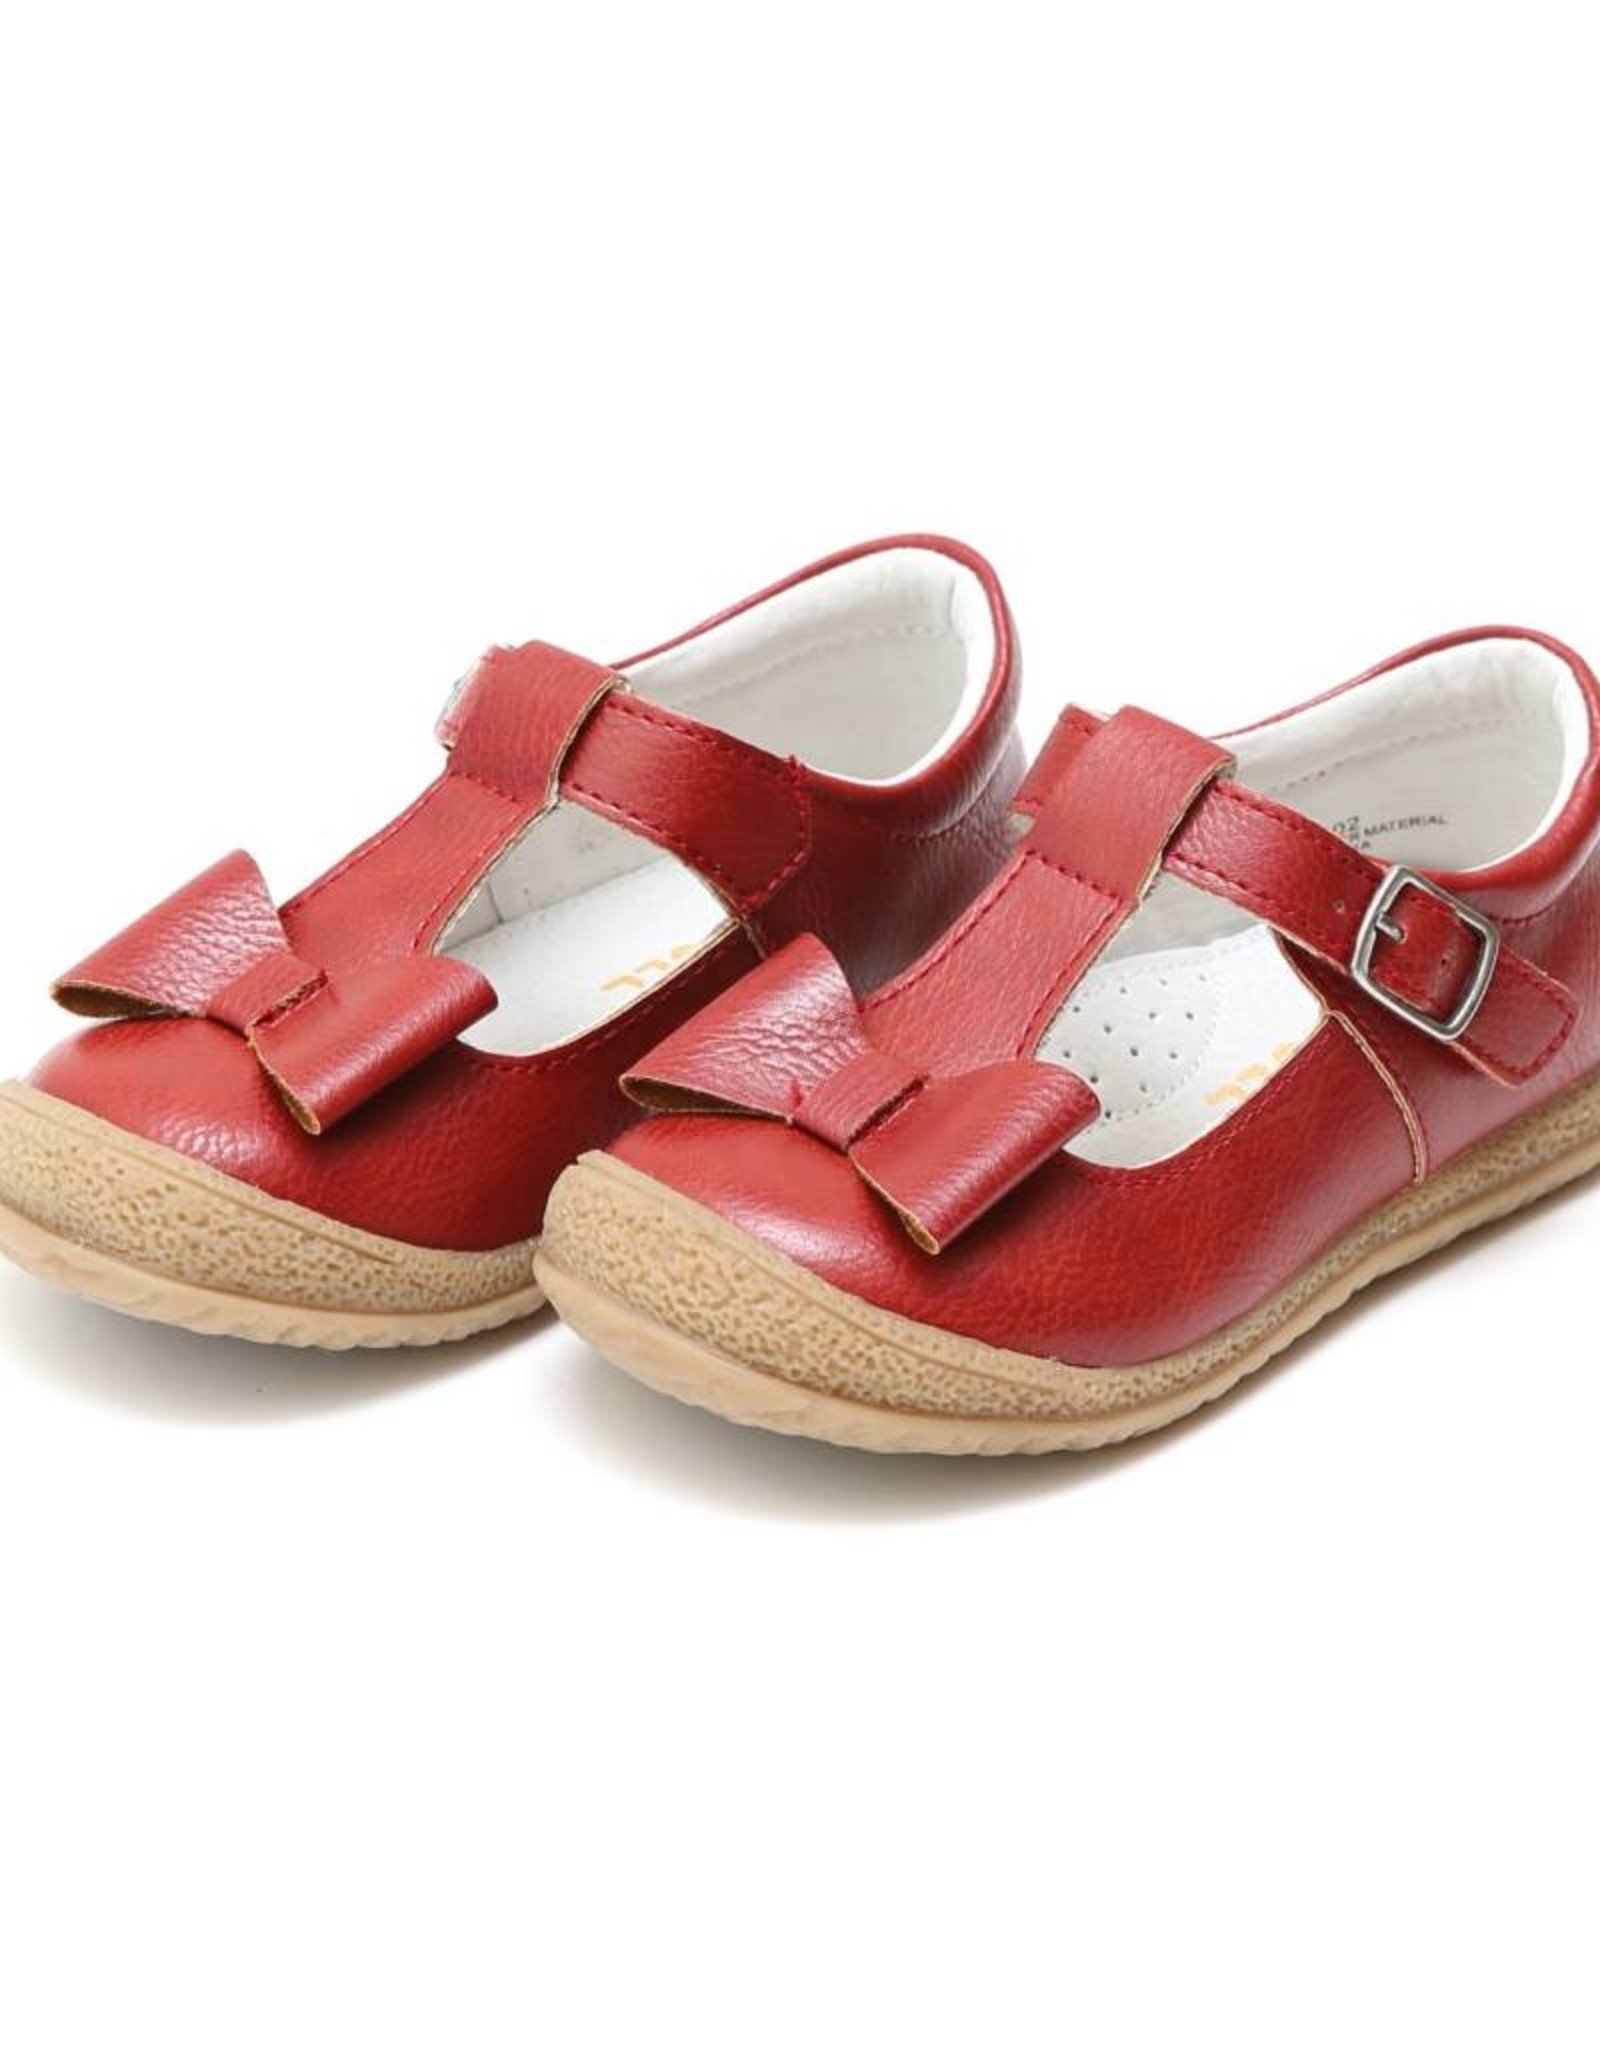 L'AMOUR Emma Autumn Bow T-Strap Mary Jane in Red